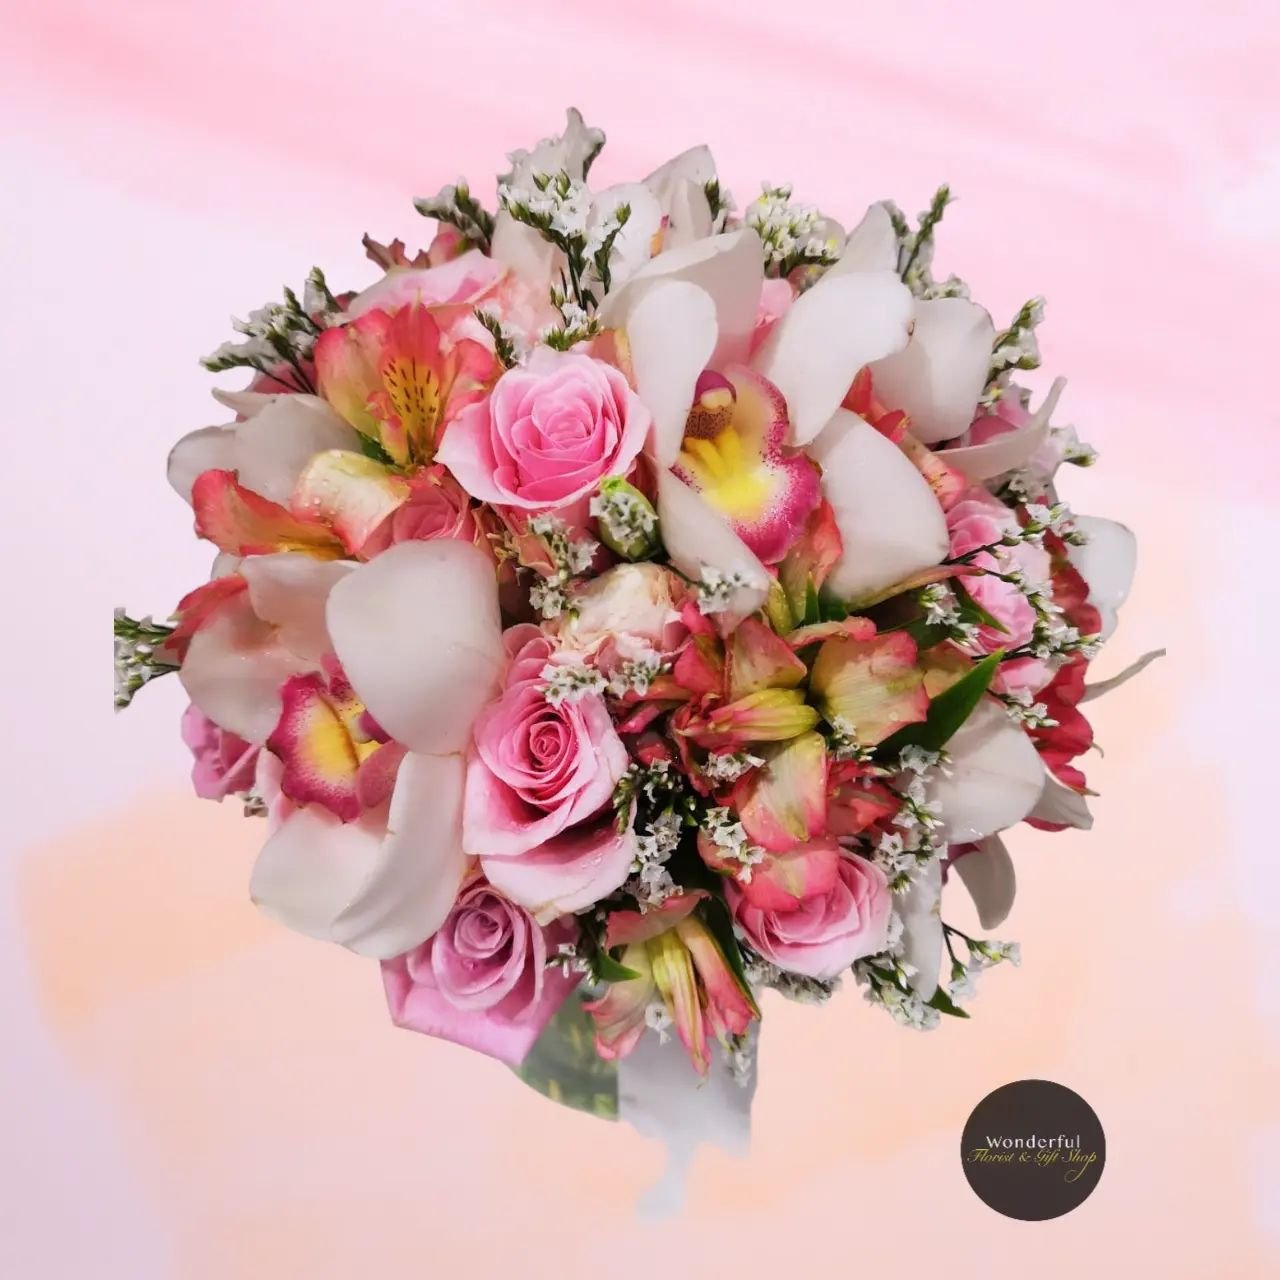 .
🌸 Say 'I do' to our stunning wedding bouquet! 
💐 Elevate your special day with the perfect blend of romance and elegance. Order now to make your wedding unforgettable.

✨ Contact us today to get a personalized quote for your perfect bouquet. Let'